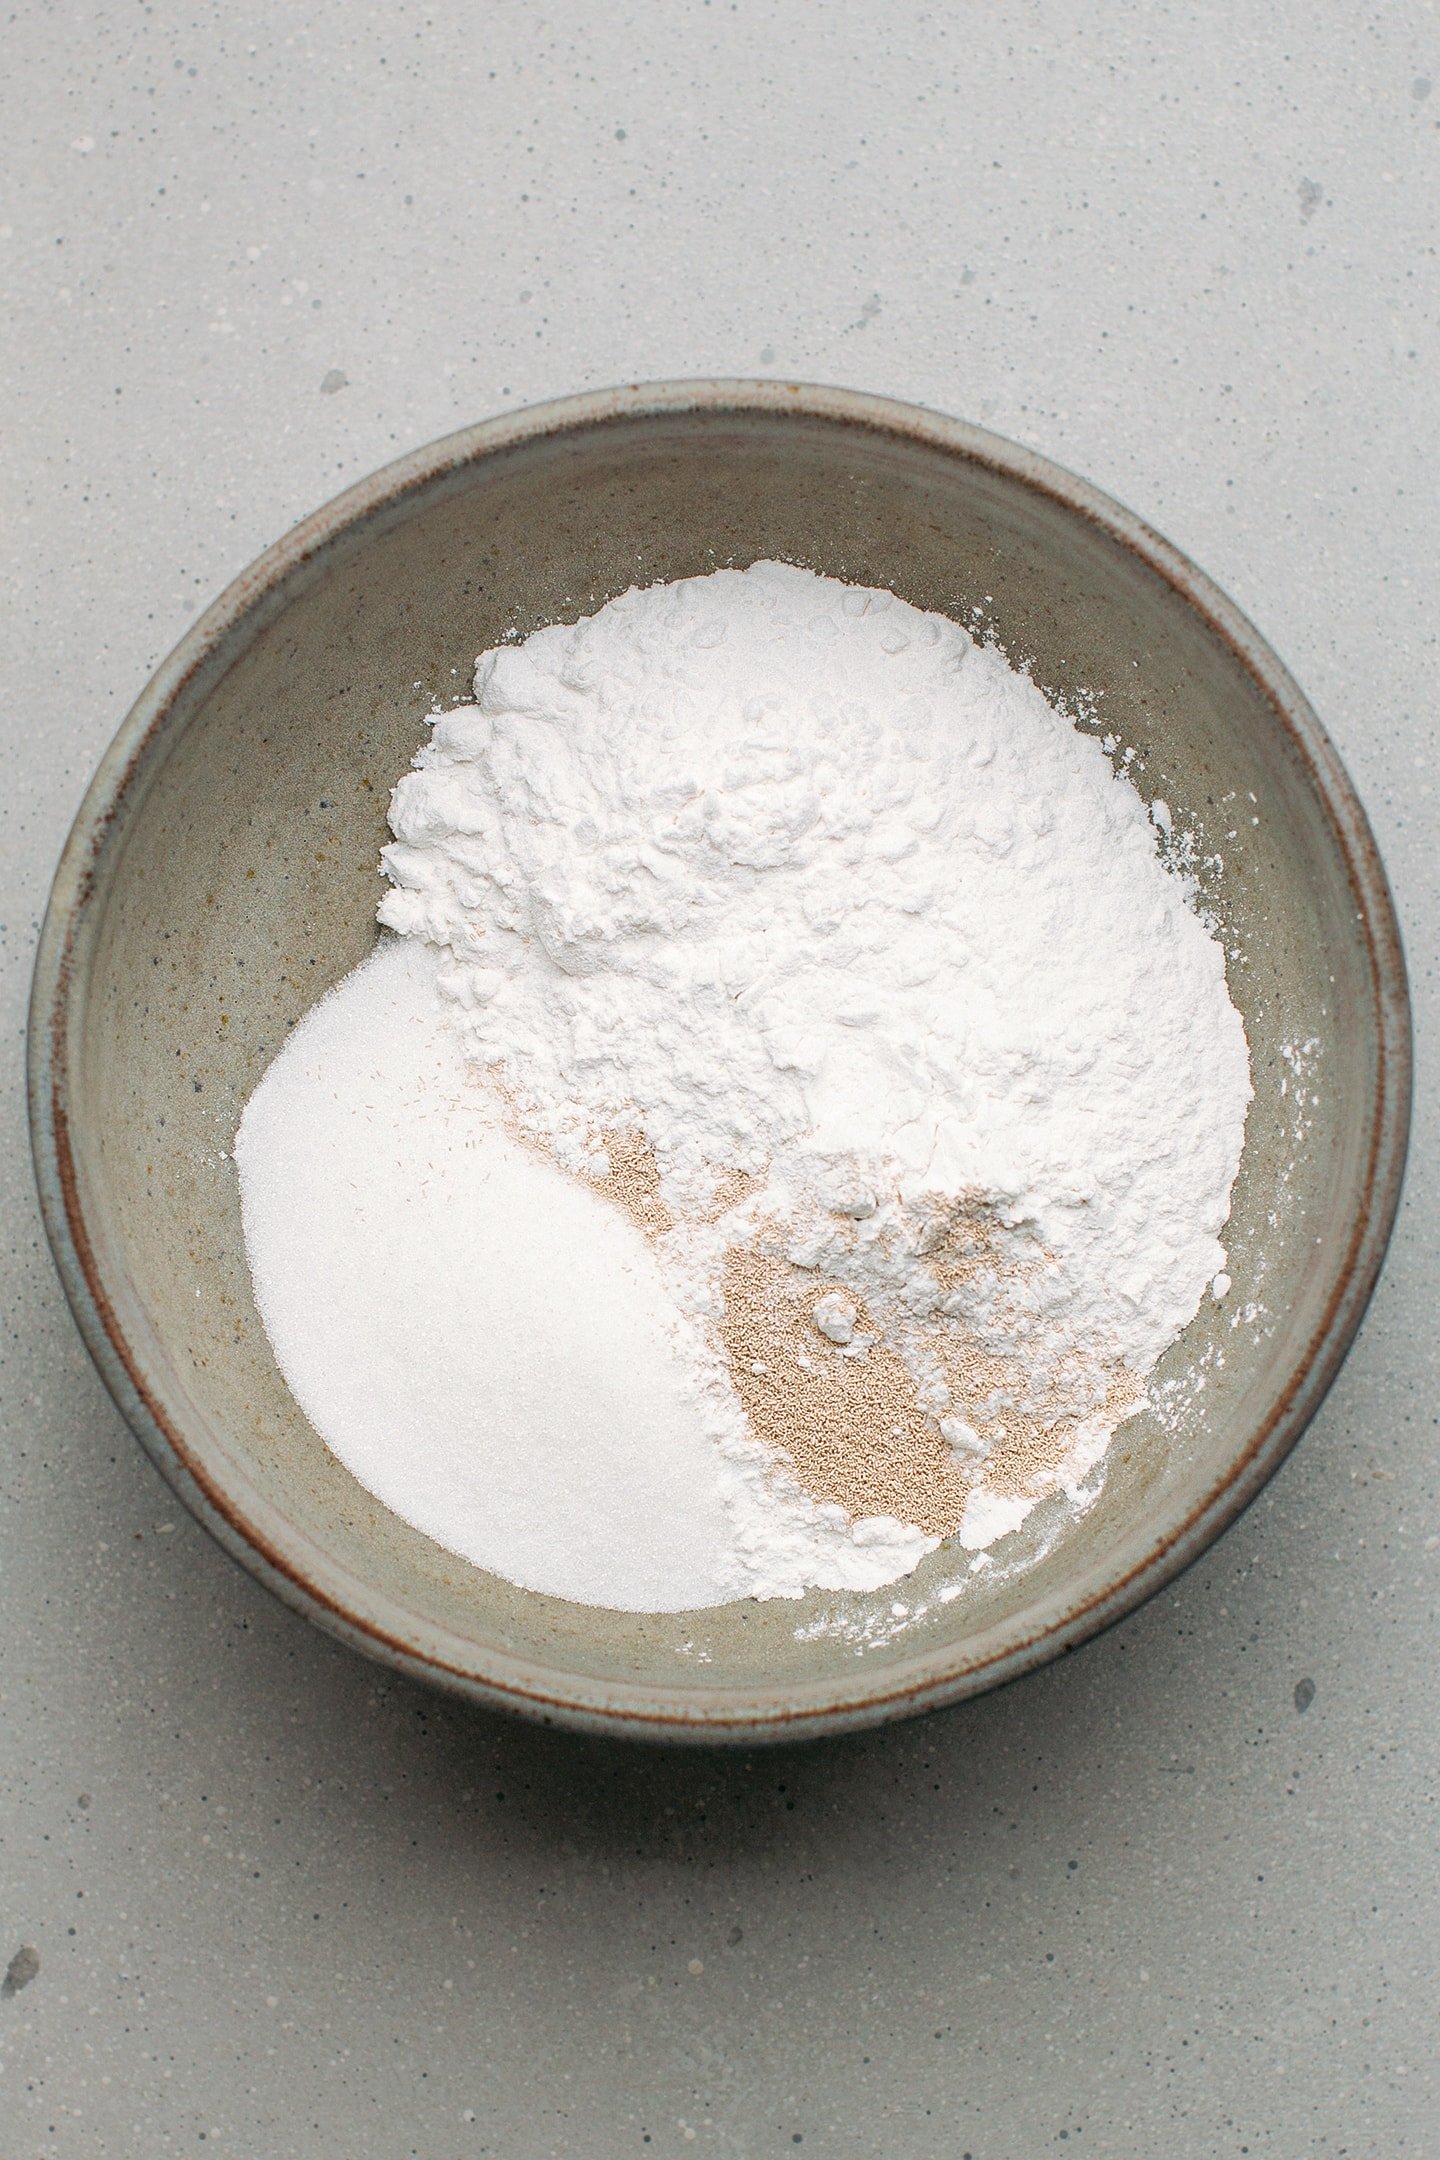 Rice flour, tapioca starch, yeast, and sugar in a mixing bowl.